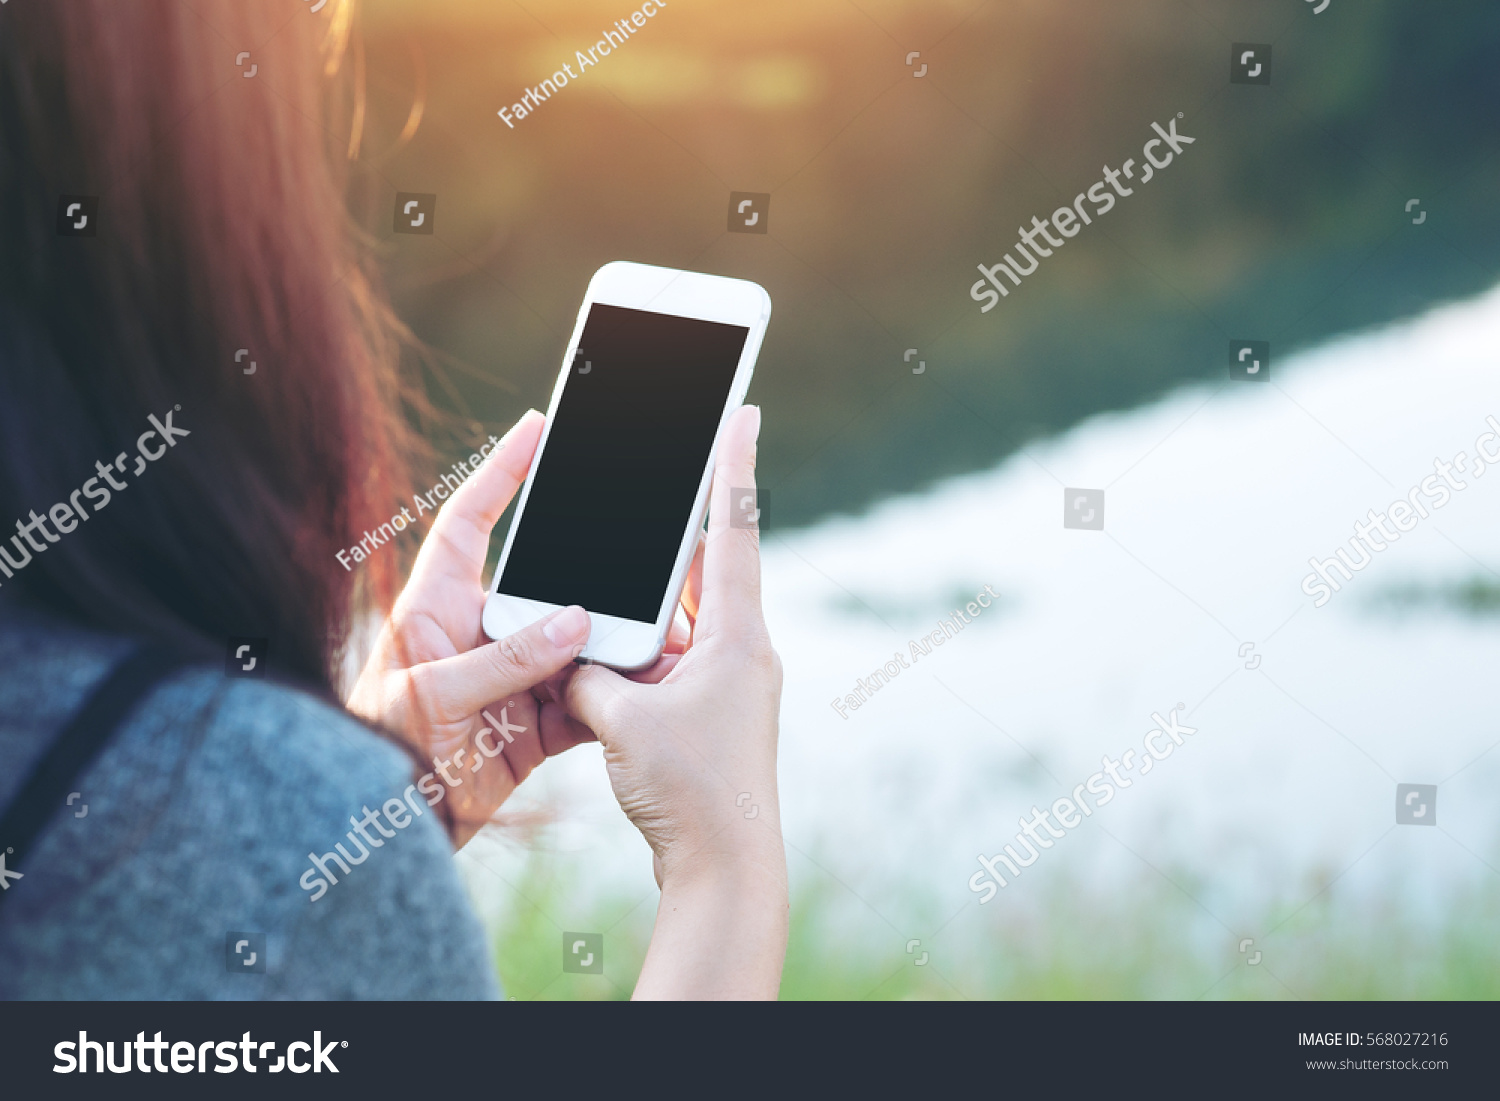 Mockup image of a woman using smart phone with blank black screen at outdoor and lake nature background #568027216